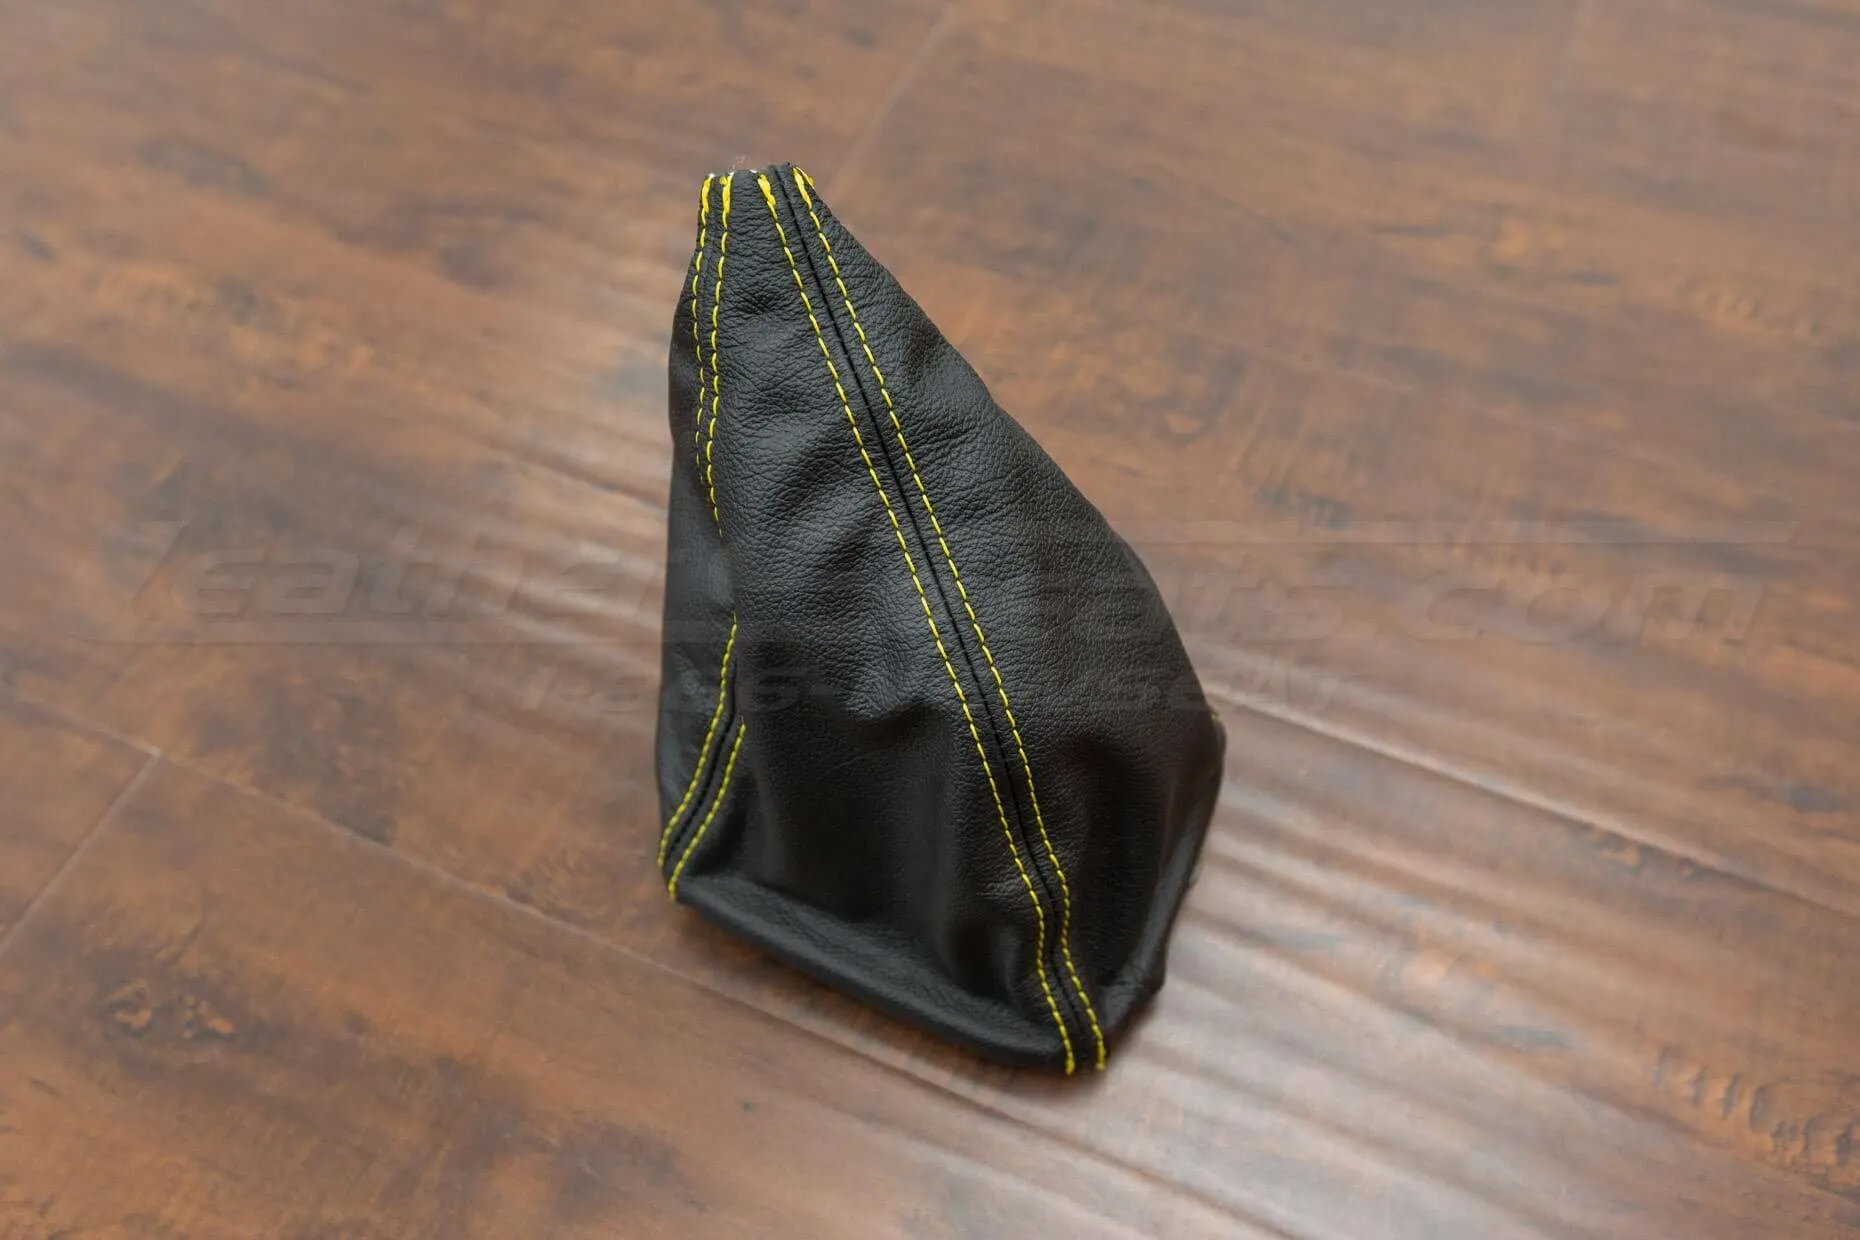 Black Jeep Shift boot with contrasting yellow stitching